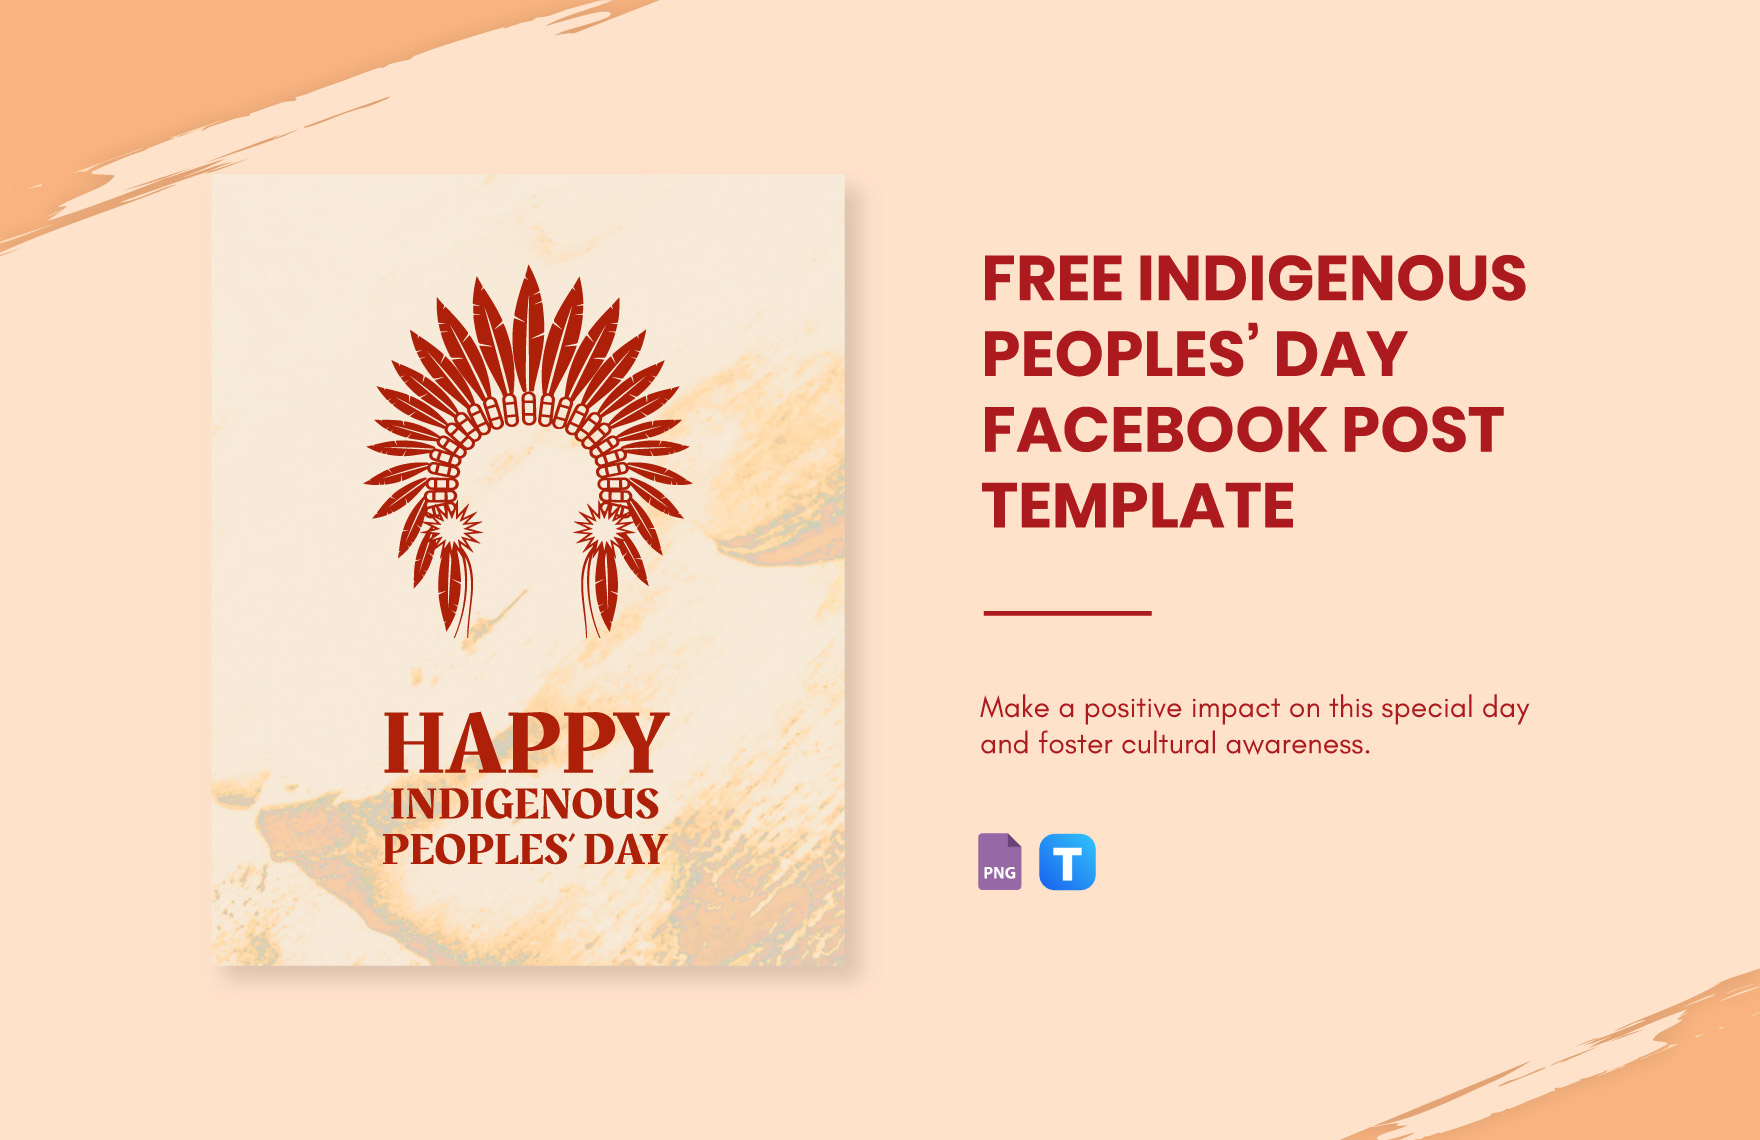 Free Indigenous Peoples' Day Facebook Post Template in PNG